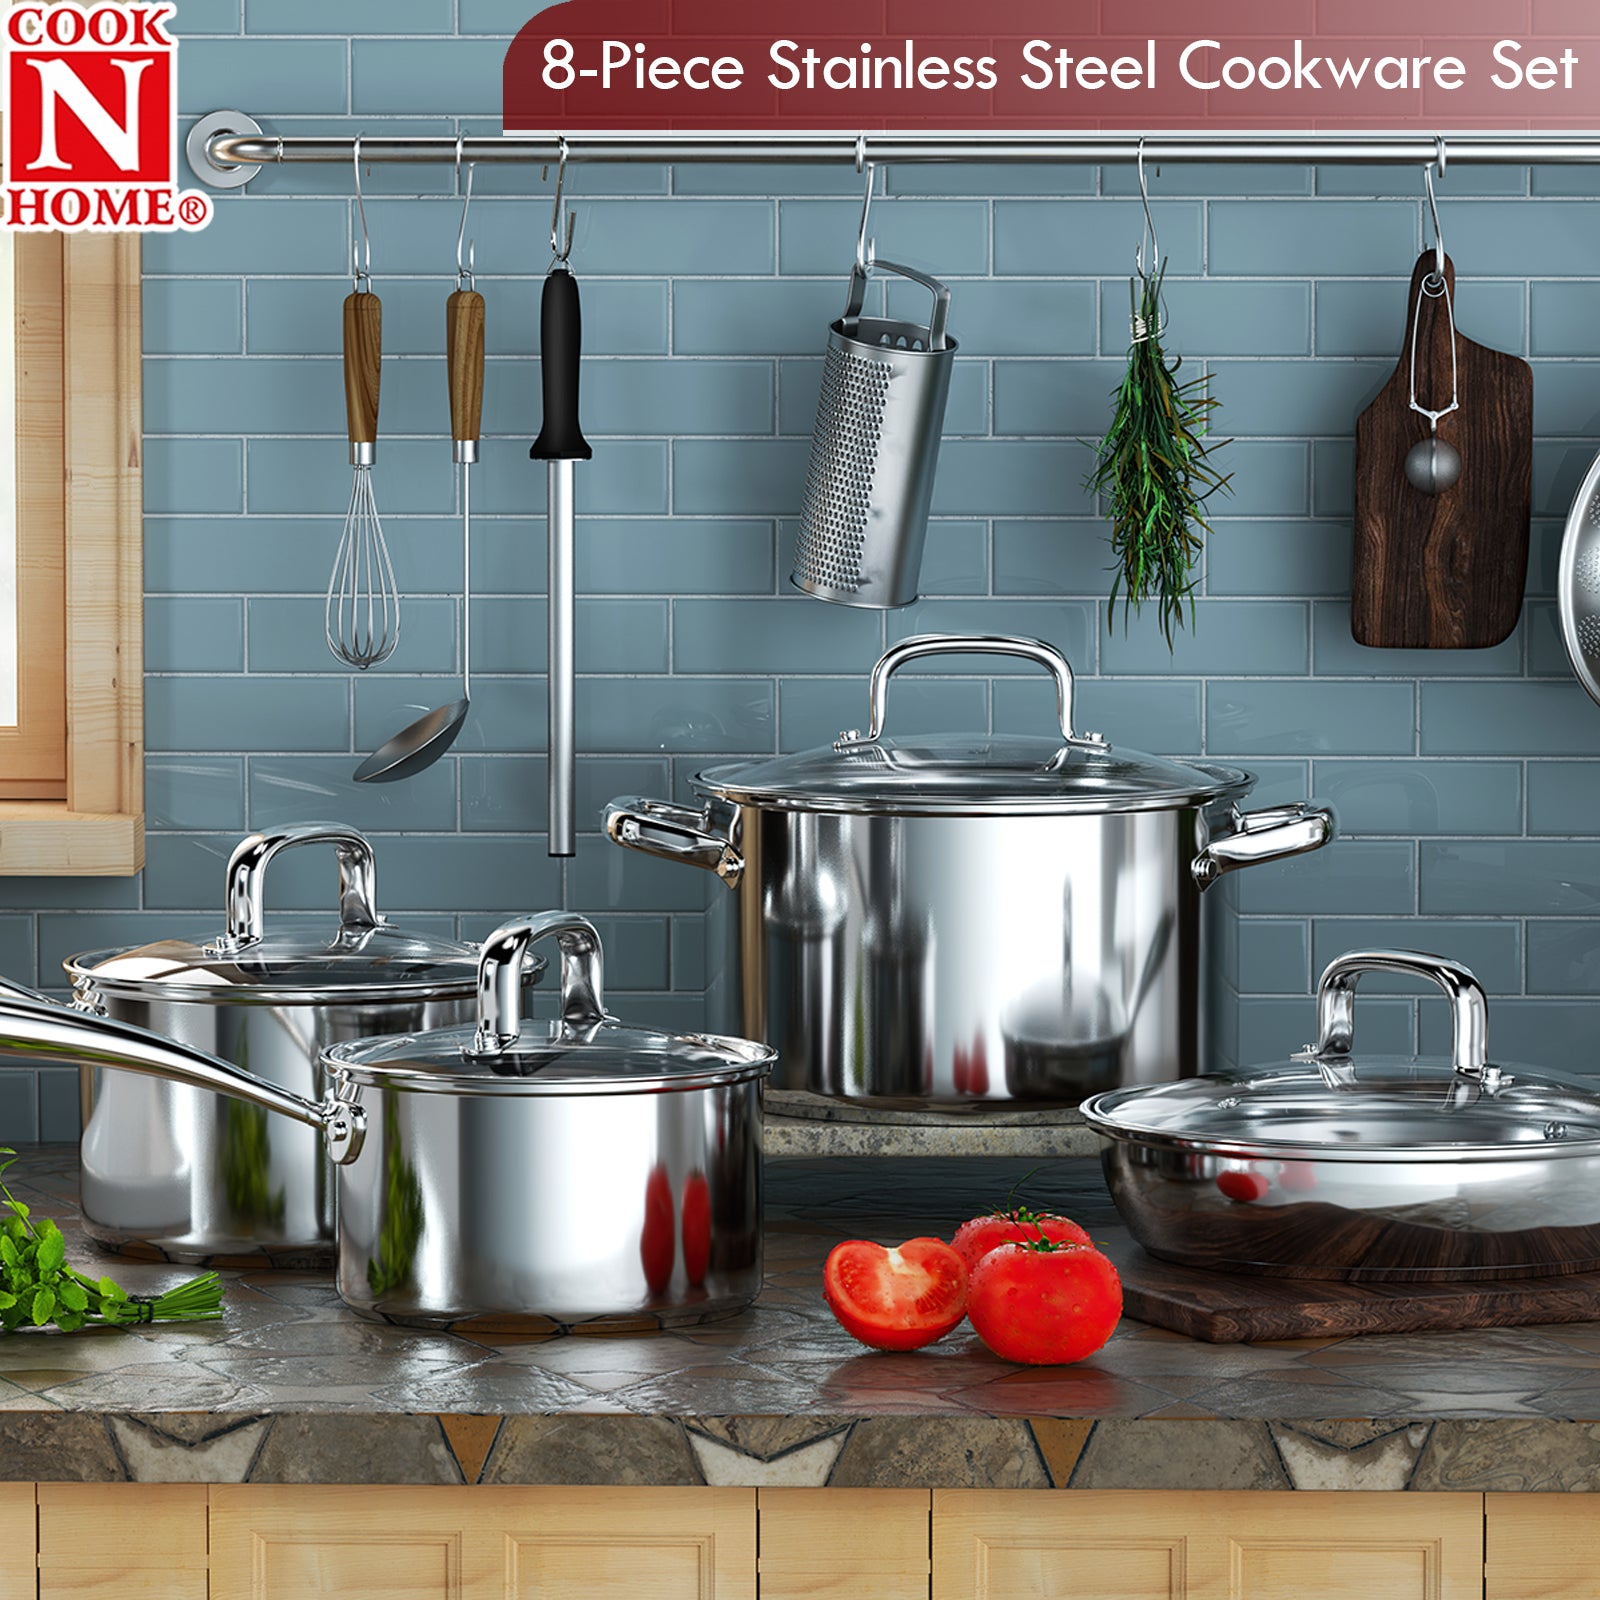 Cook N Home Pots and Pans Set Induction Kitchen Cookware Set Classic S